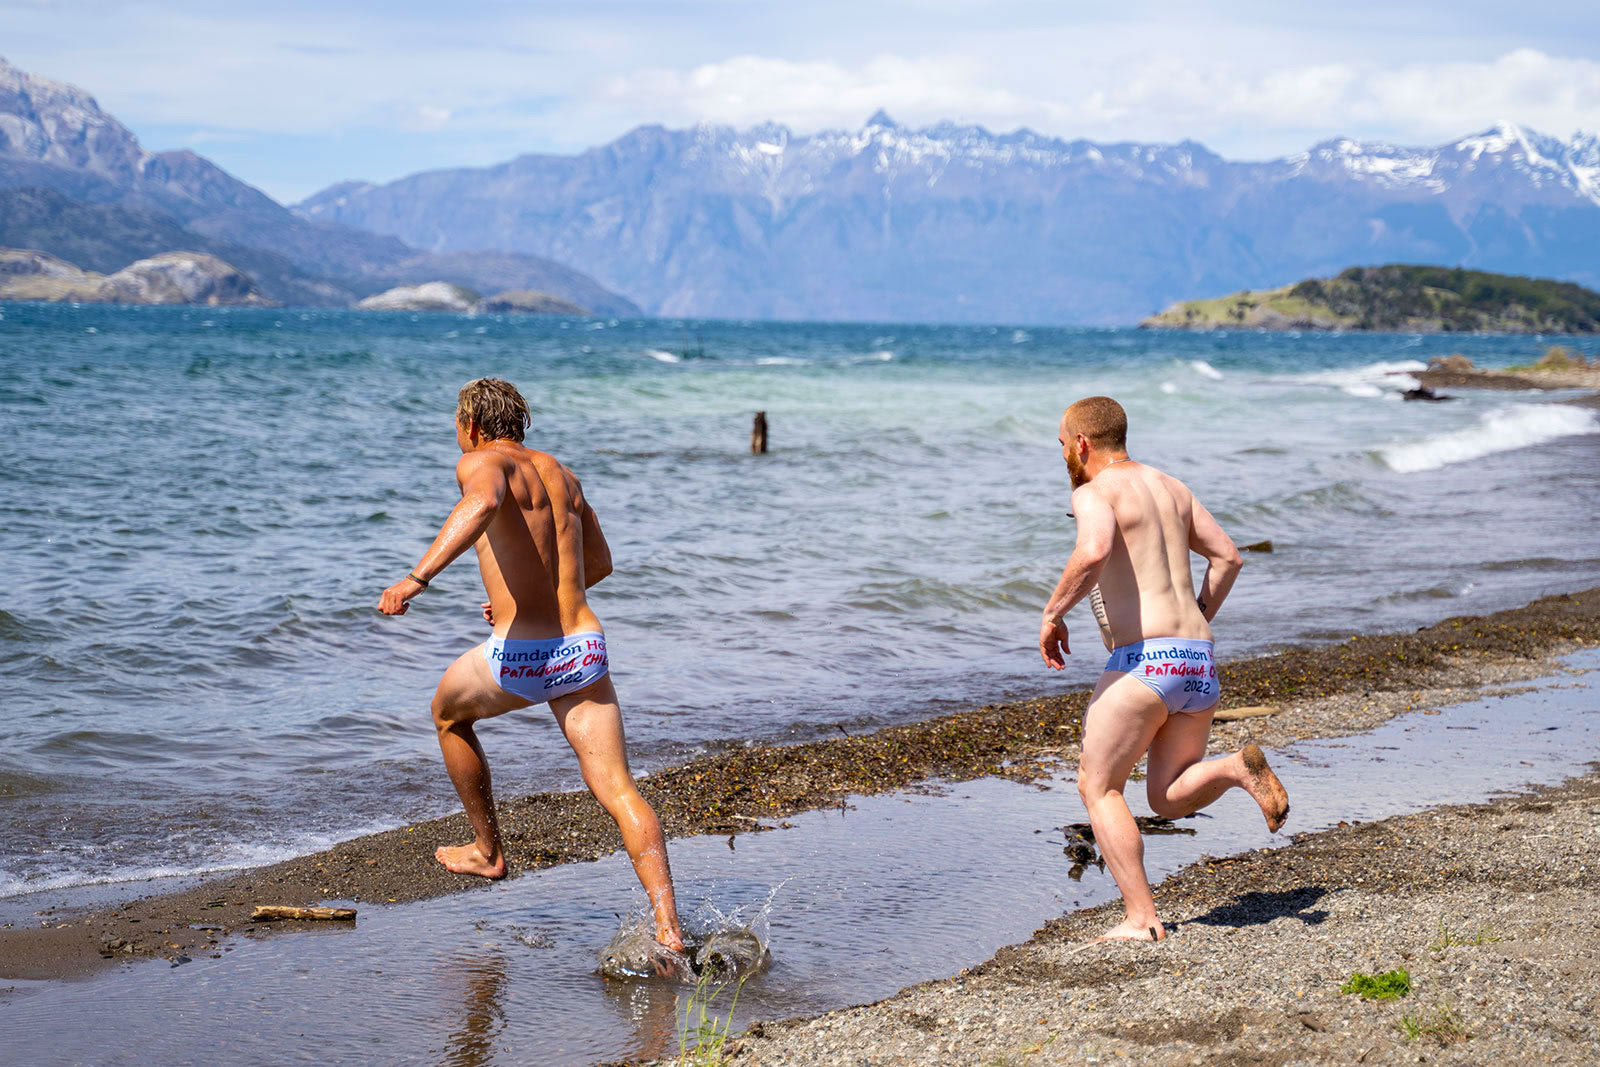 Two men in bathing suits run into icy cold ocean water in Patagonia, Chile